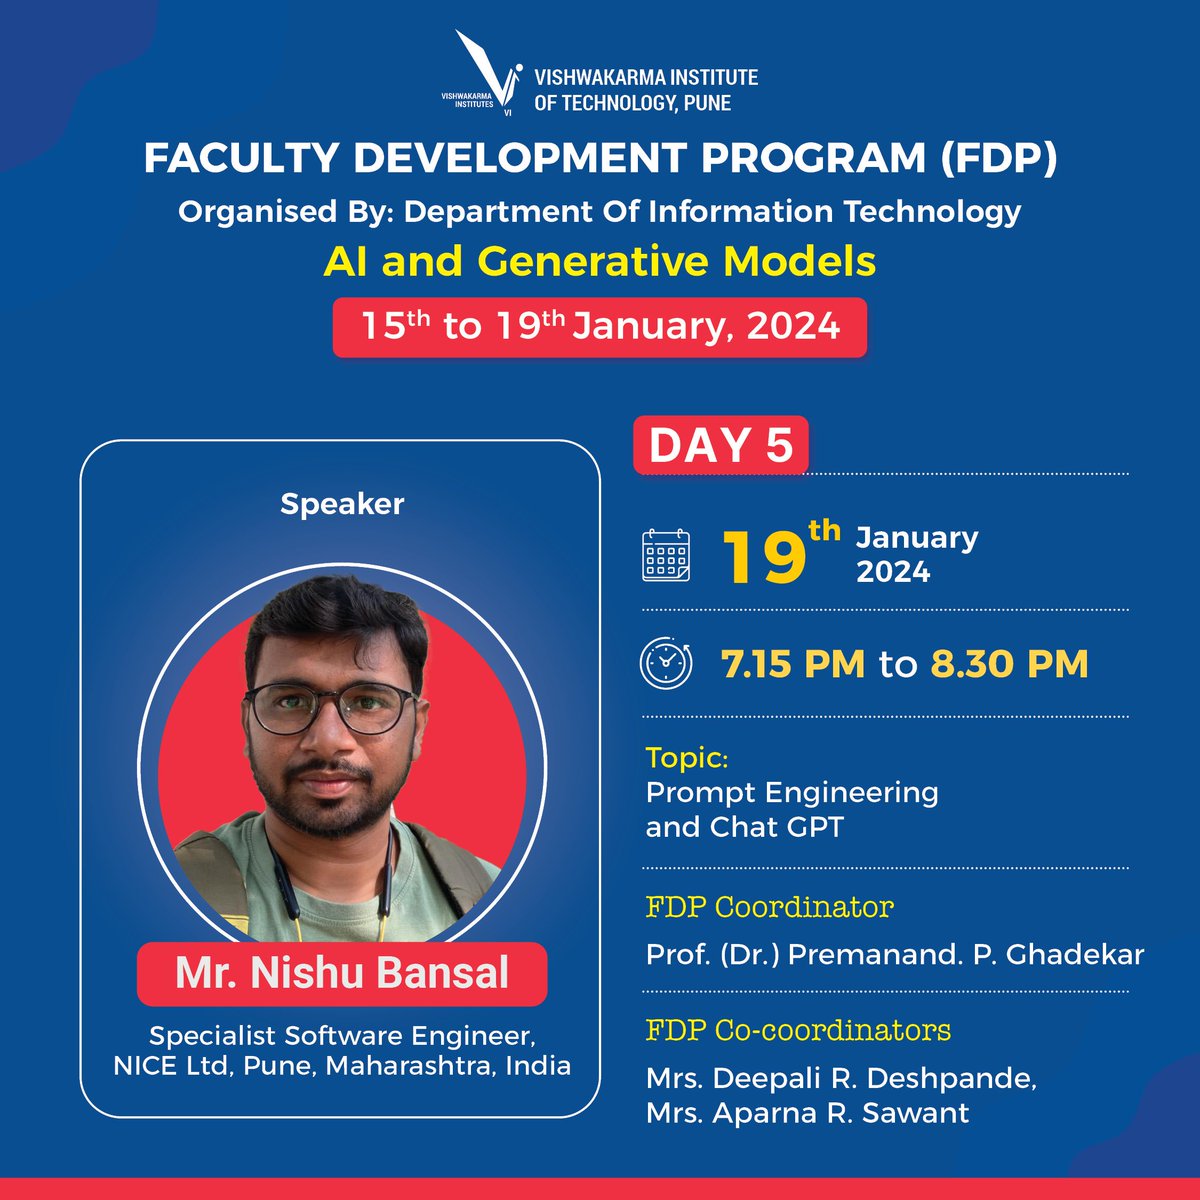 Day 5 of our Faculty Development Program (FDP) on AI and Generative Models
#ai #fdp #development #engineeringinstitute #engineeringcollege #engineeringcollege #vitstudents #vitpune